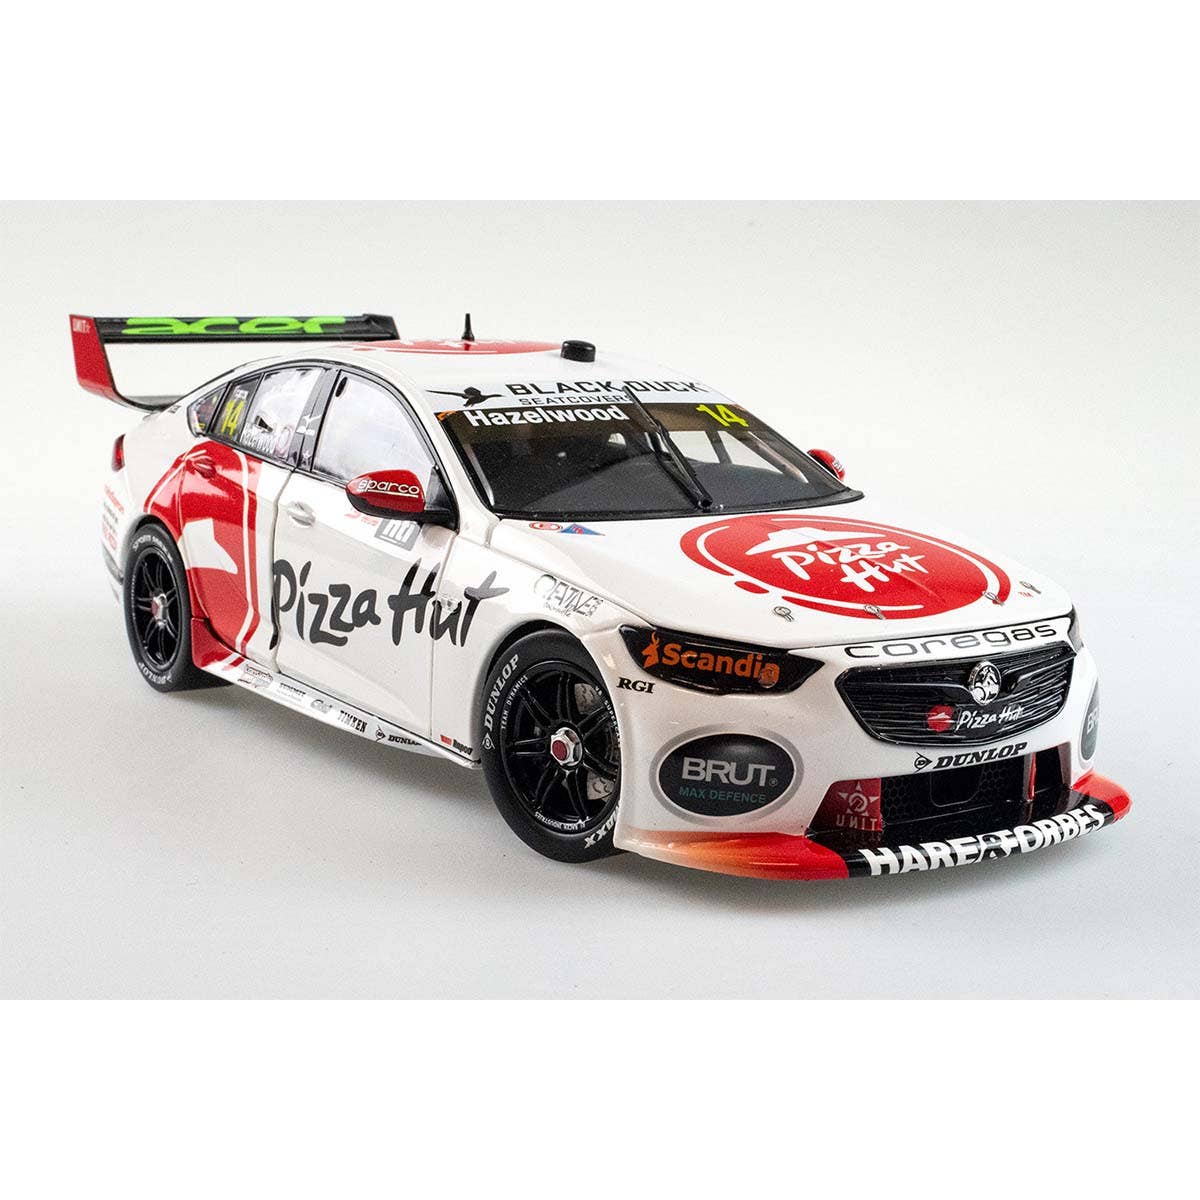 HOLDEN ZB COMMODORE - BJR PIZZA HUT - HAZELWOOD #14 - 2021 NTI Townsville 500 Race16 - 1:43 Scale Diecast Model Car